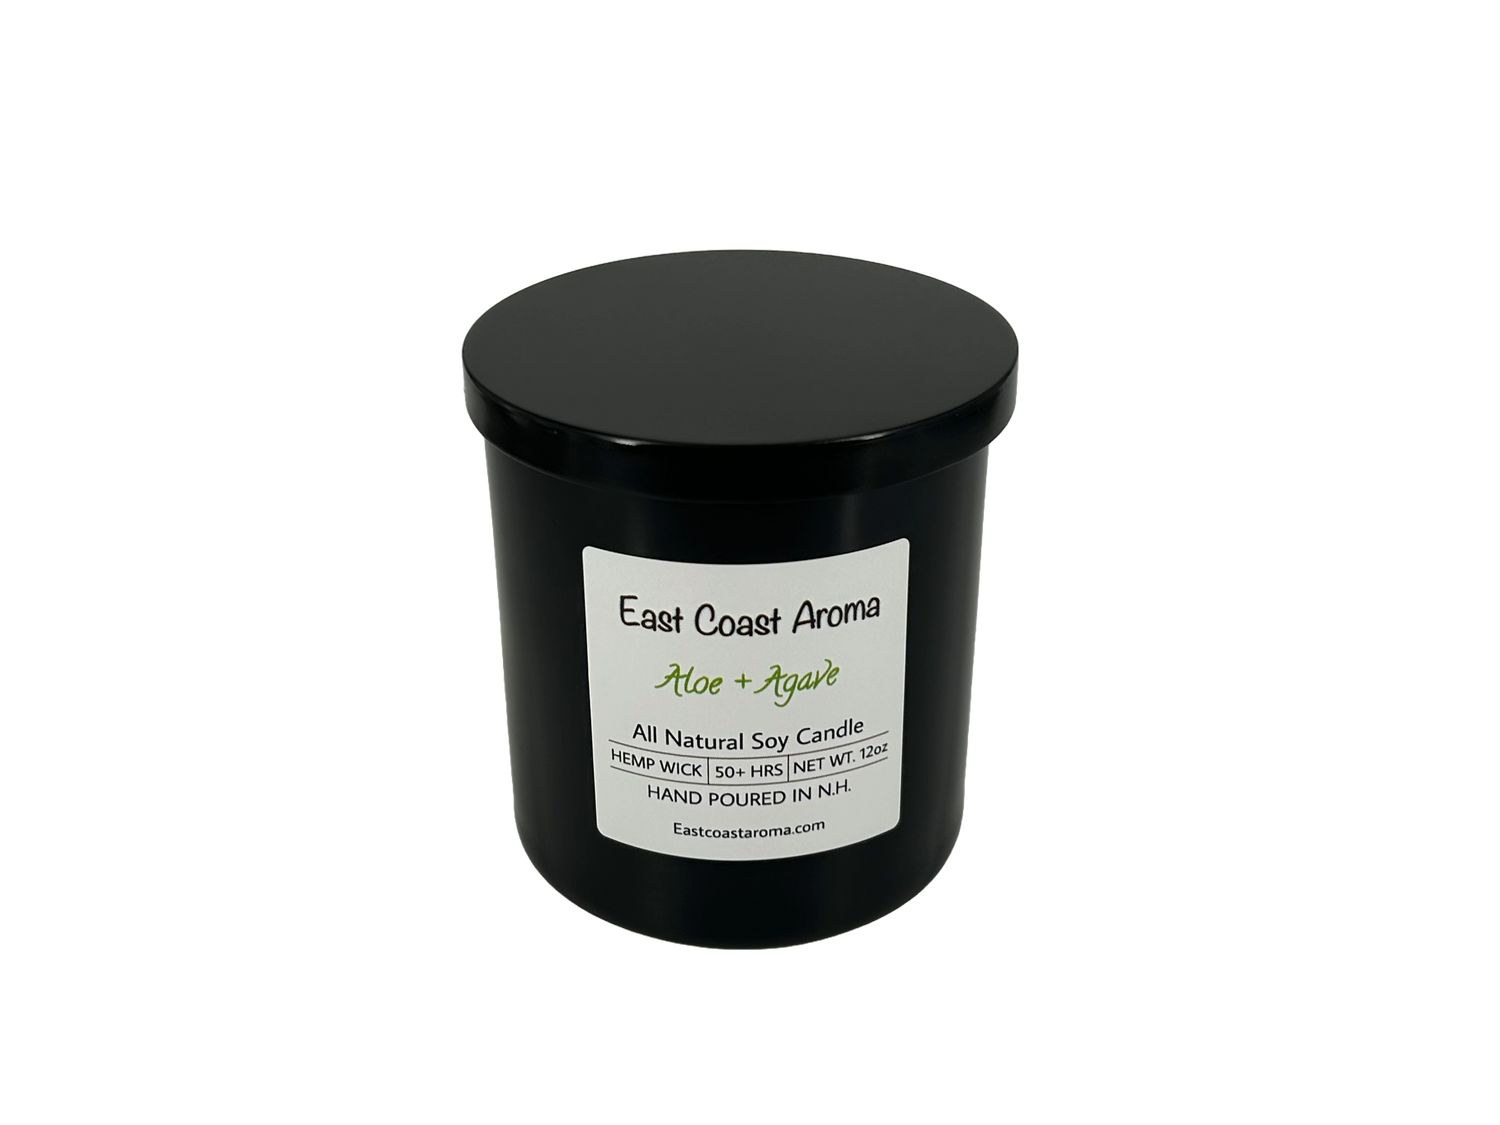 12oz Aloe and Agave Soy Candle